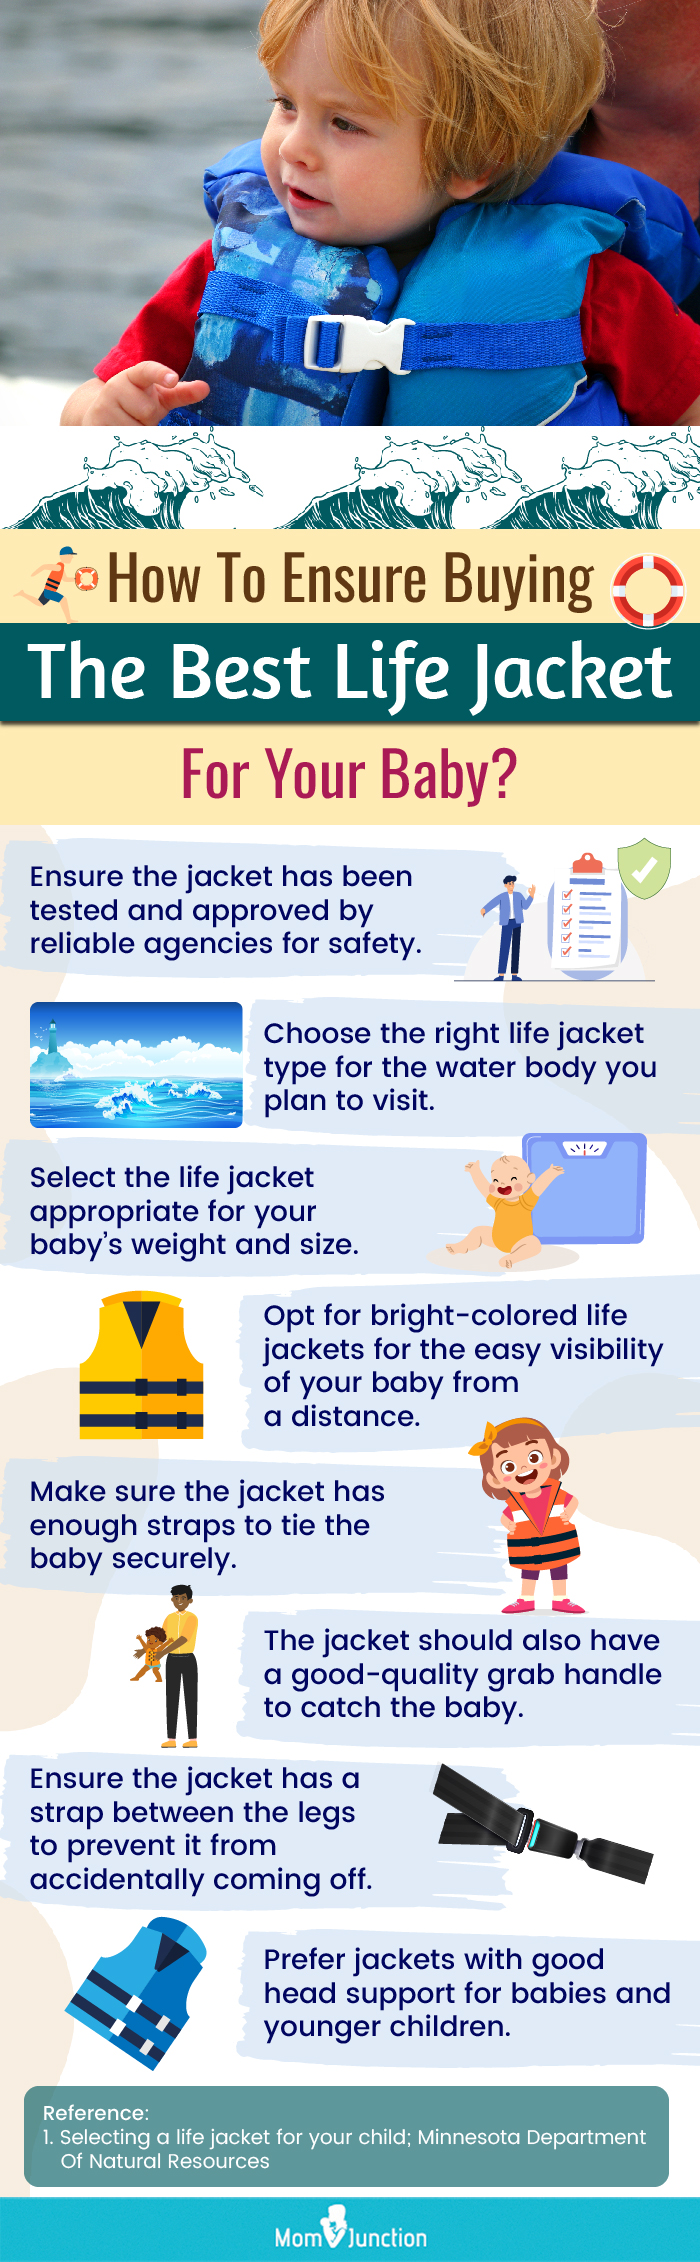 How To Ensure Buying The Best Life Jacket For Your Baby (infographic)